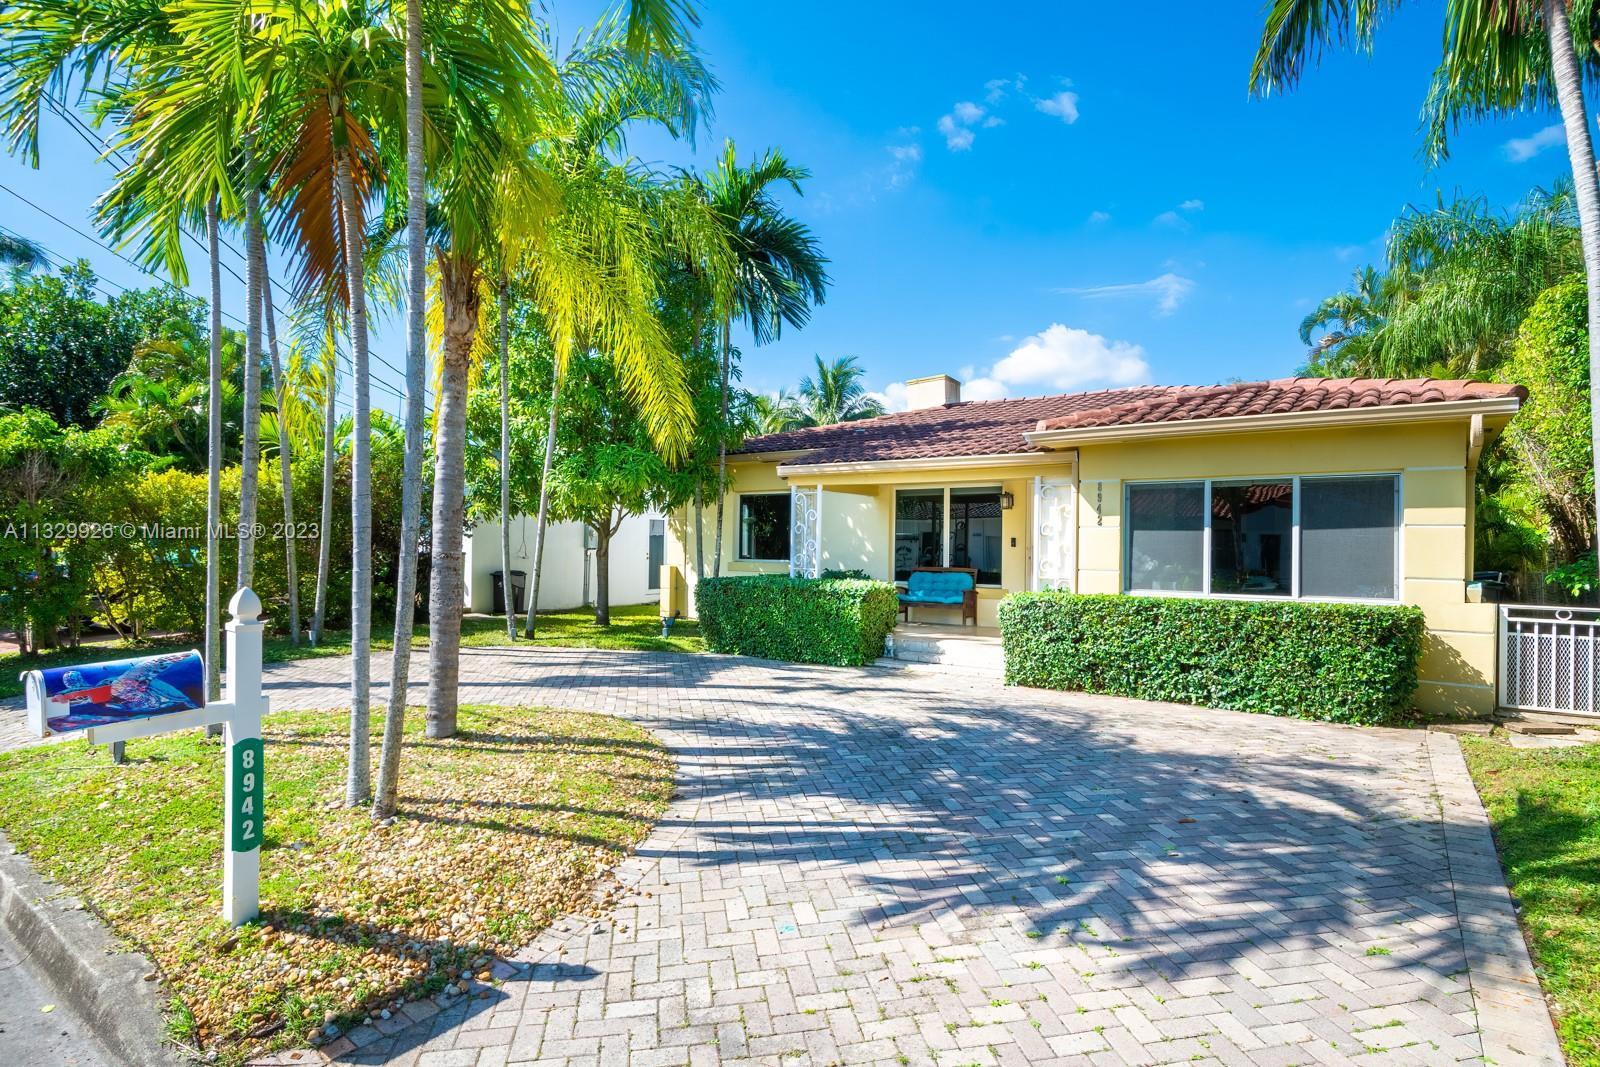 Charming four bedroom, three bath home 2065sqft located in the coveted Surfside community! This love